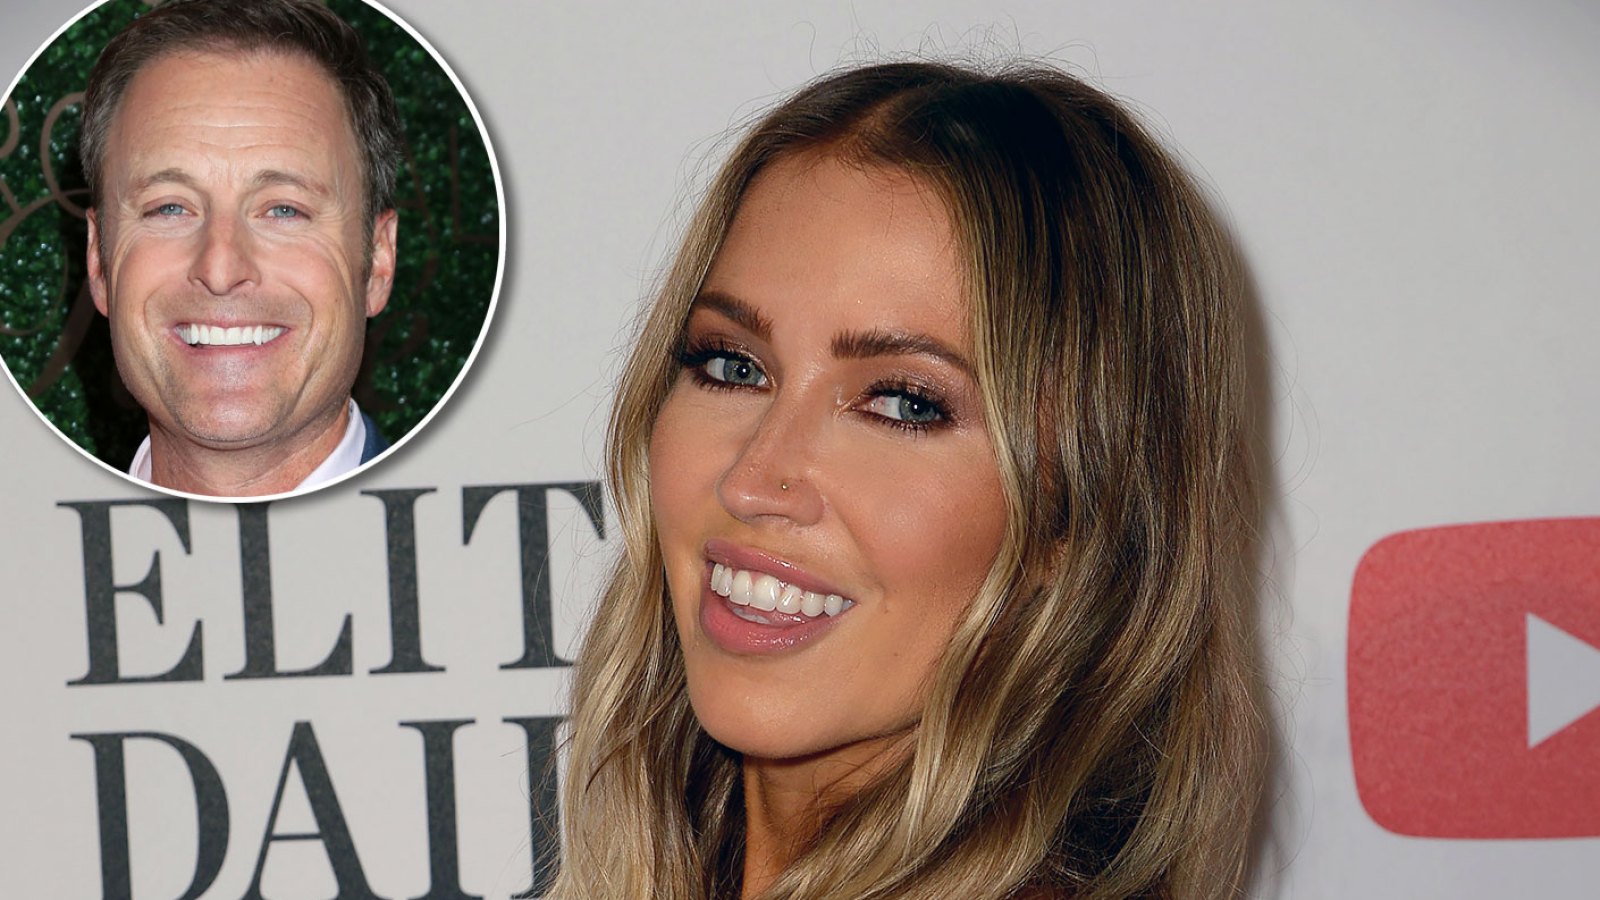 Kaitlyn Bristowe Reacts to Chris Harrison’s Official ‘Bachelor’ Exit 